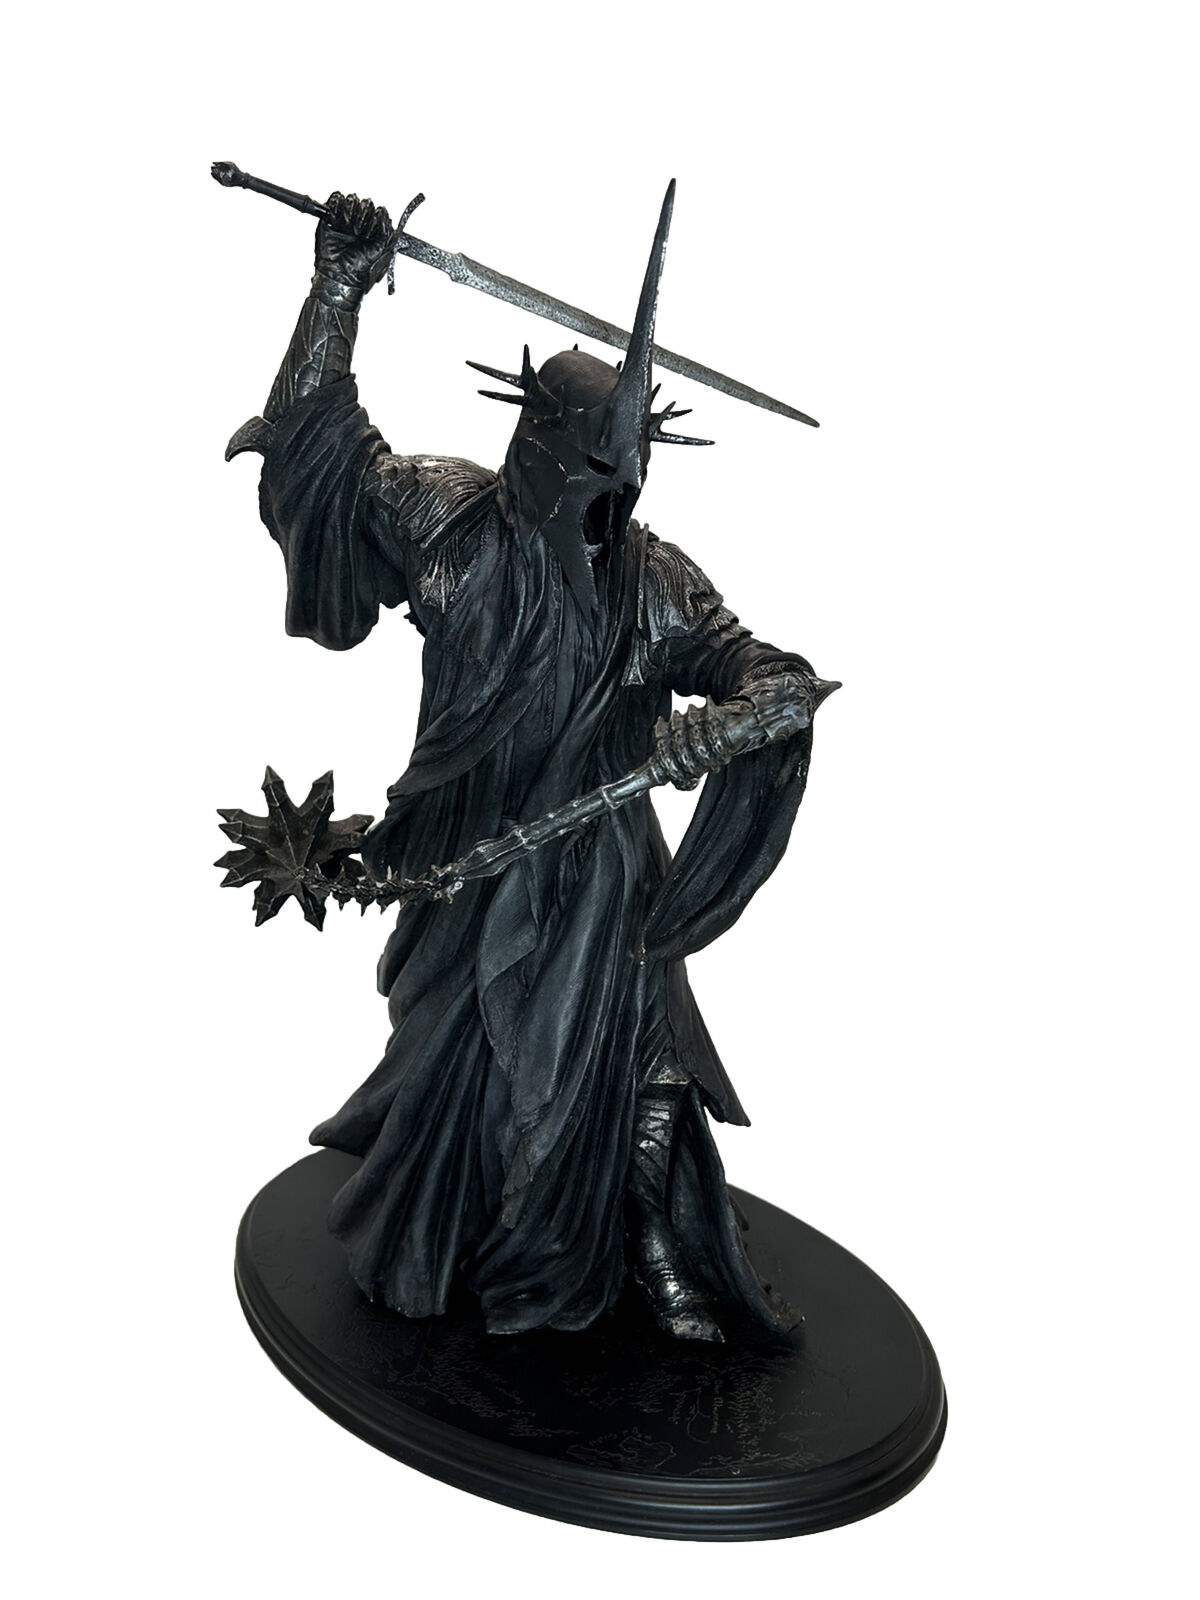 Sideshow Weta MORGUL LORD Witch-King Lord of the Rings Return of the King LOTR